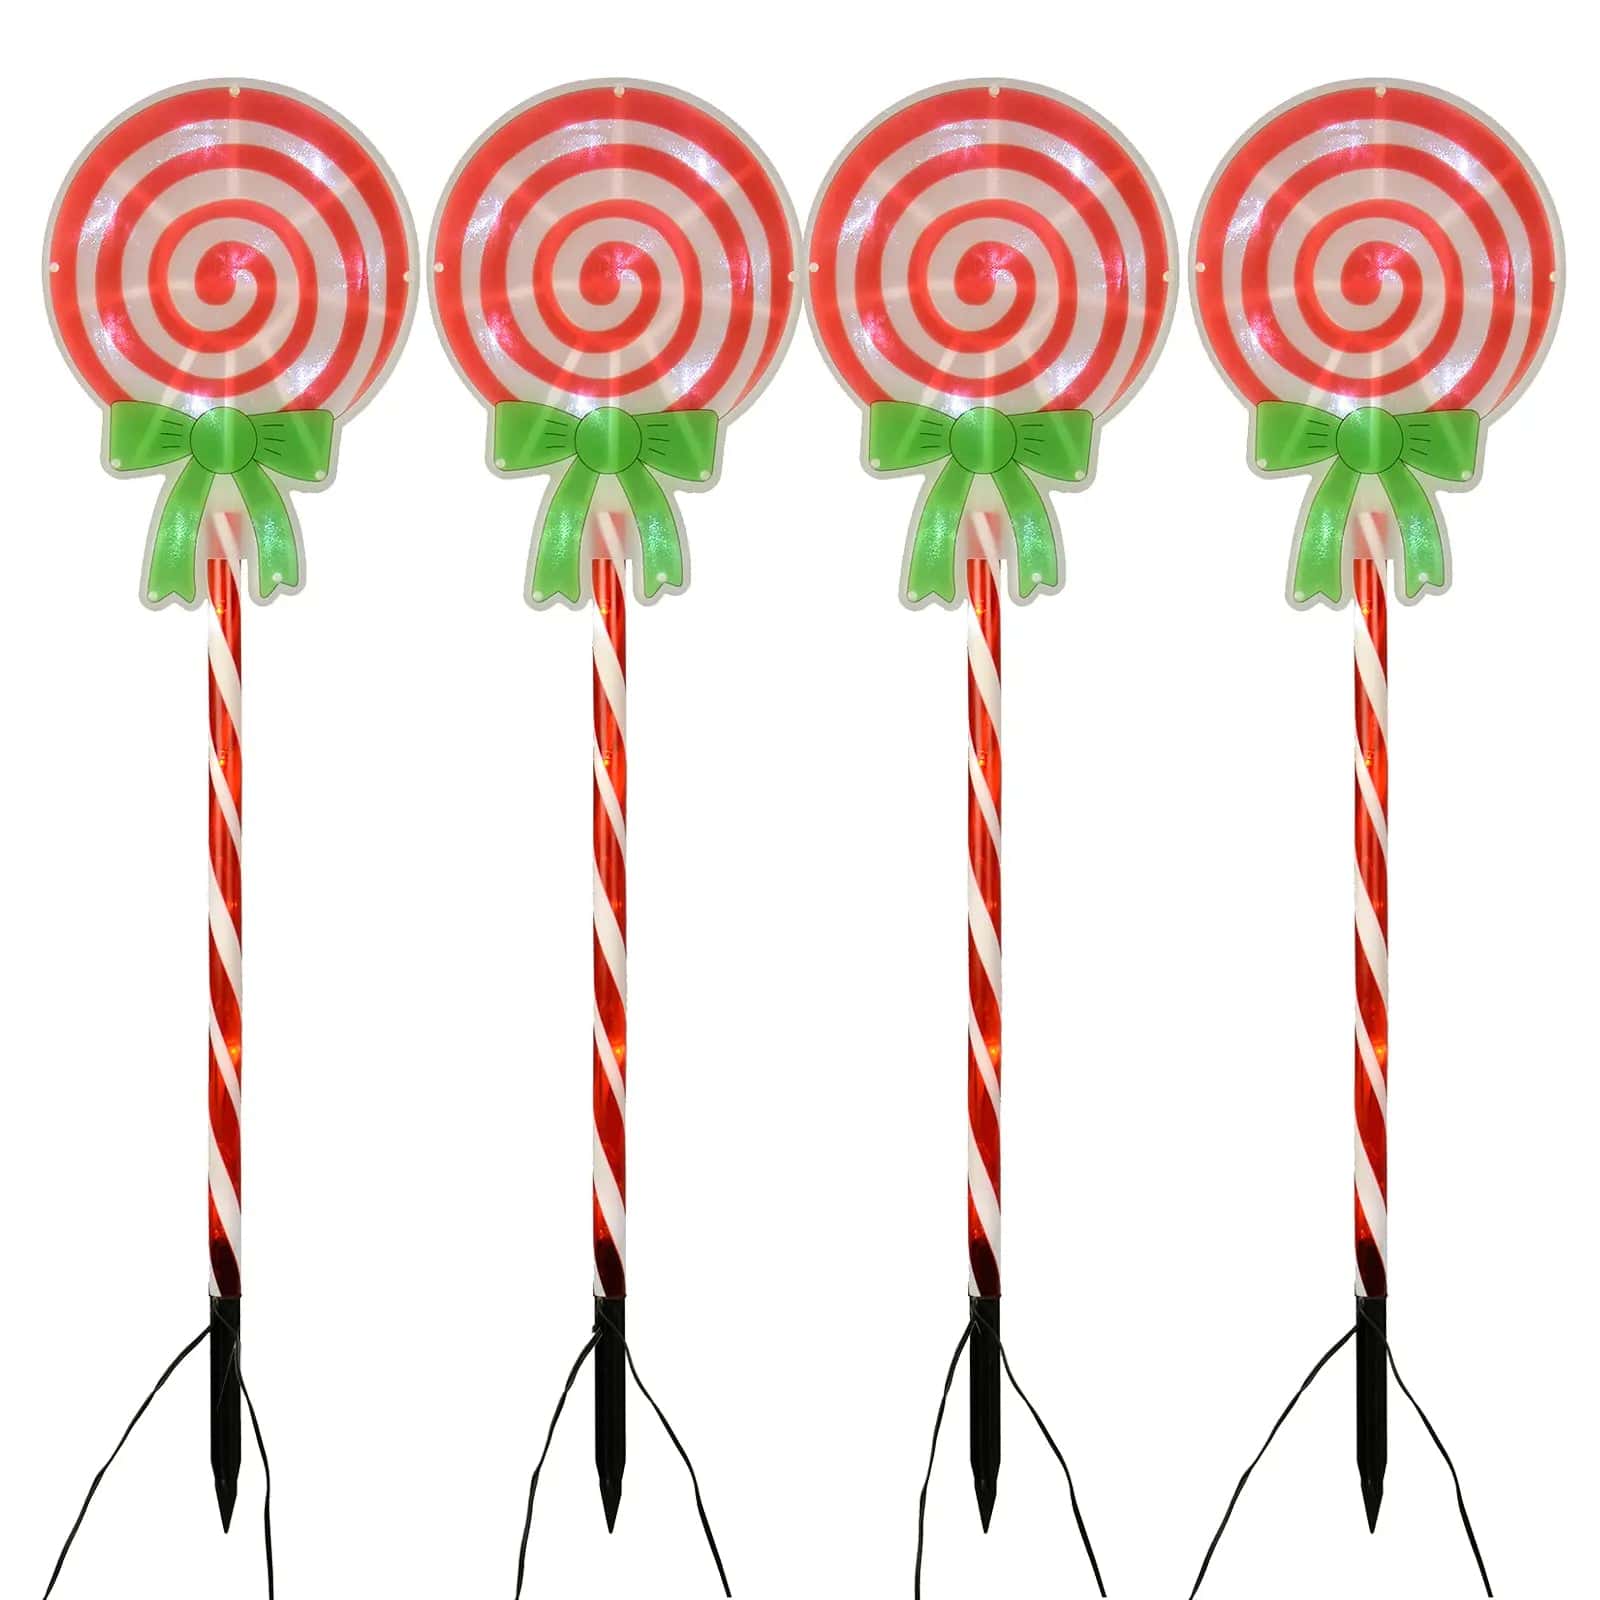 set of 4 lollipop swirl christmas pathway stake lights featuring green bow with red and white stripe design